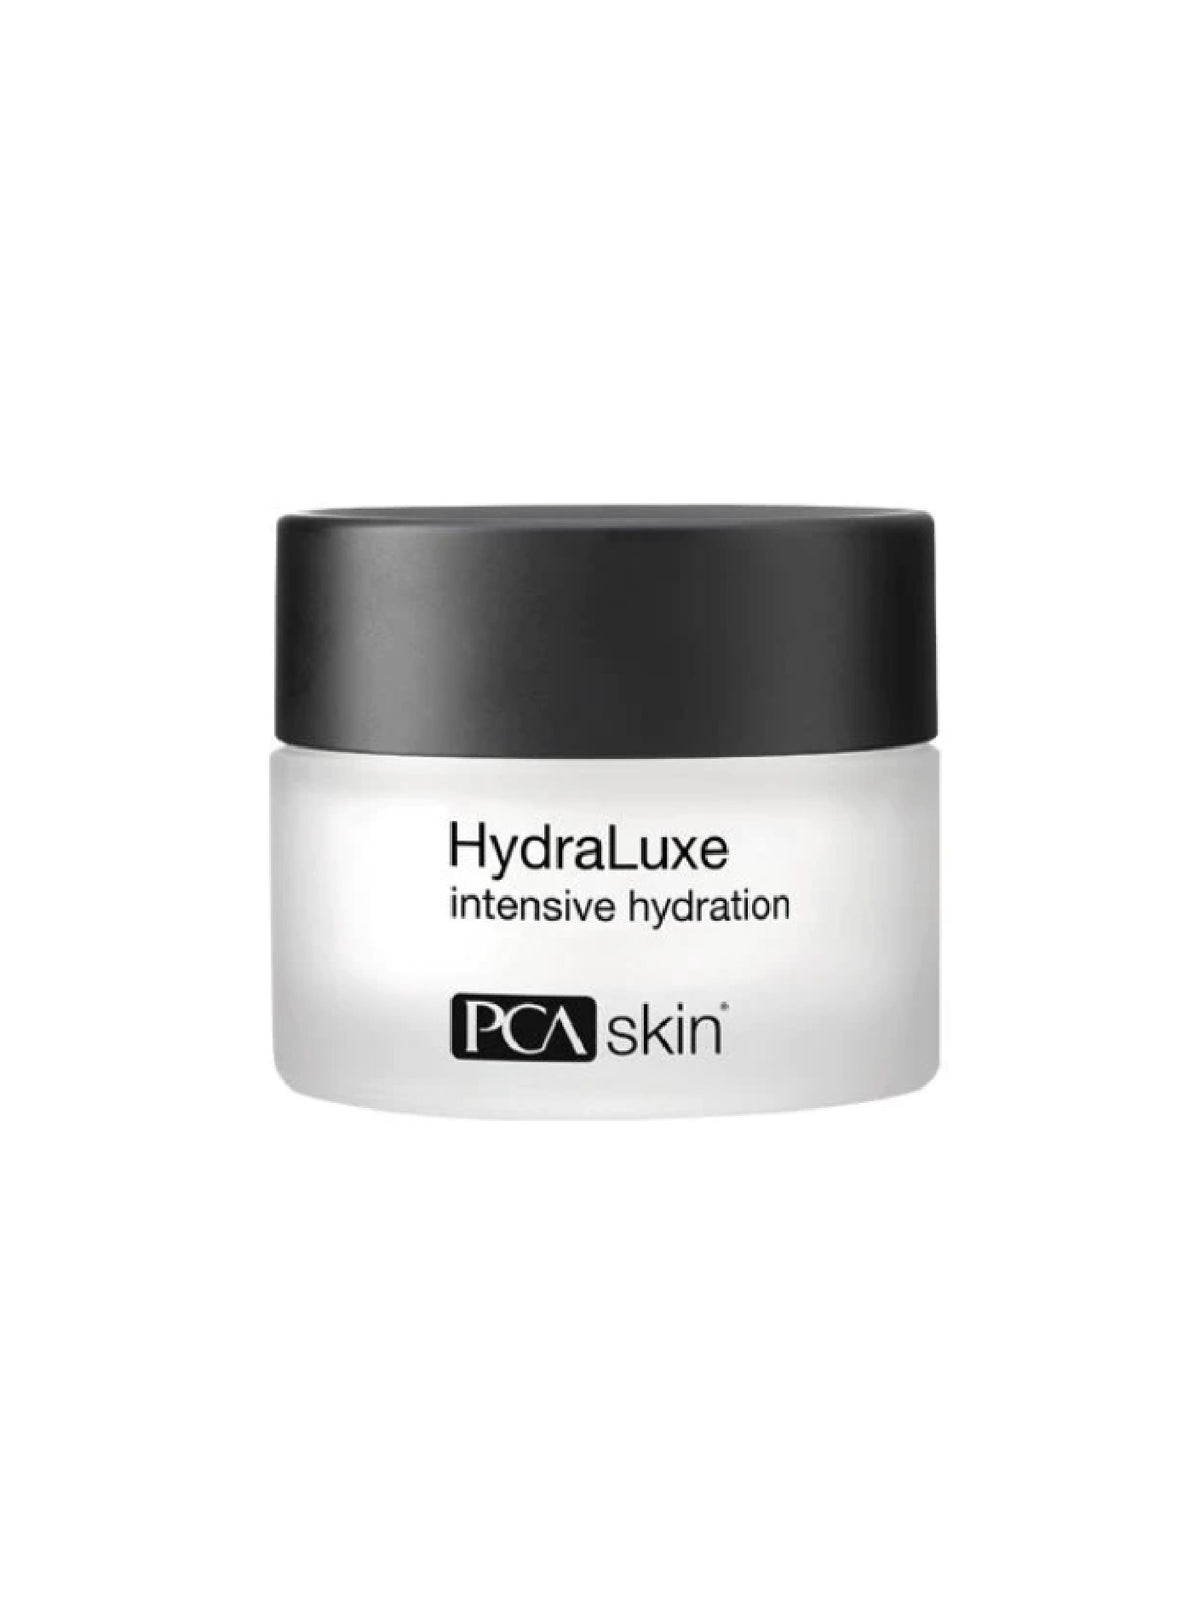 Hydraluxe 1.8 oz